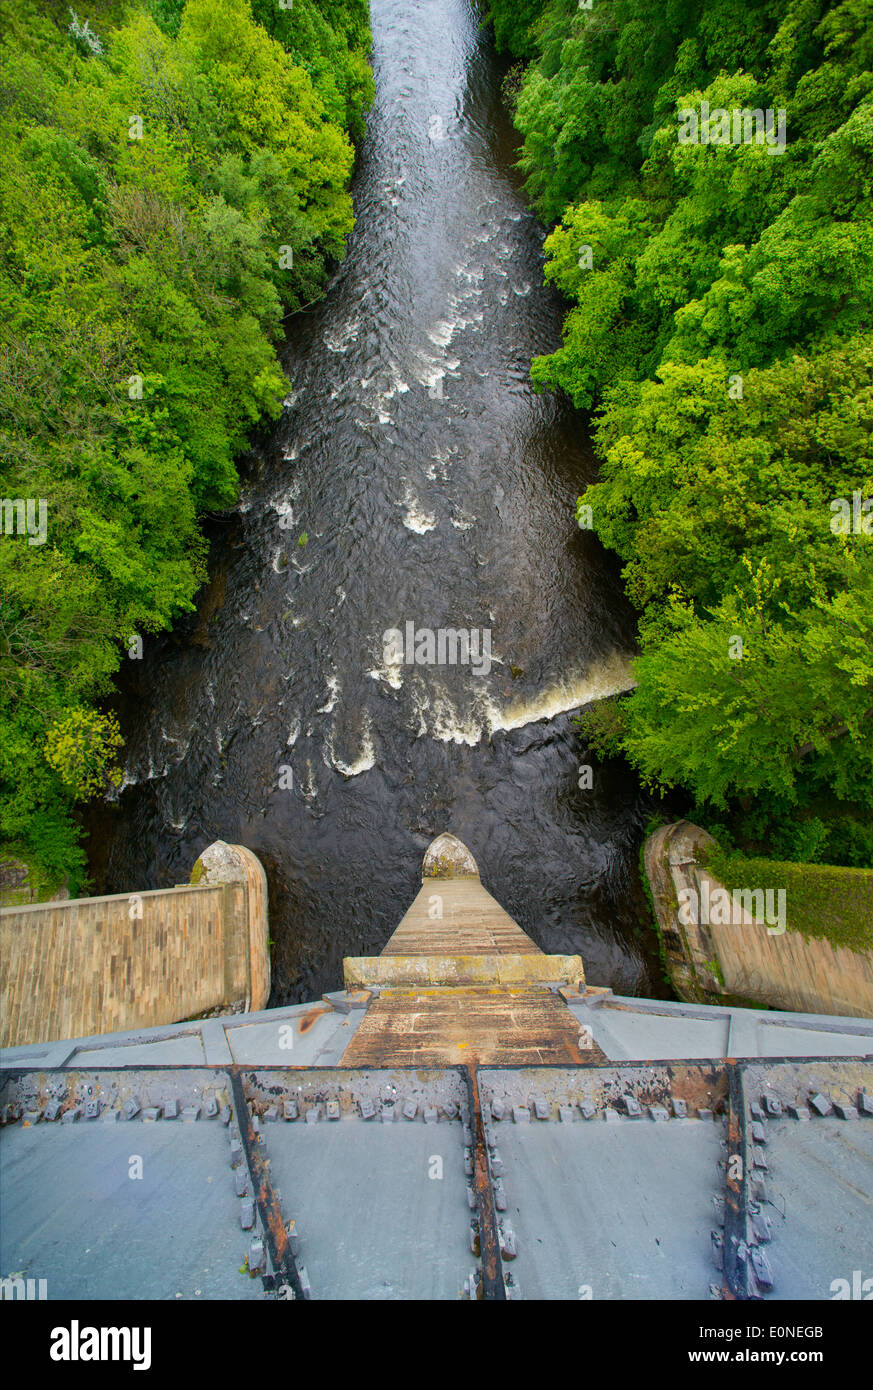 Looking down on the River Dee from Pontcysyllte Aqueduct, Trevor, North Wales. Stock Photo